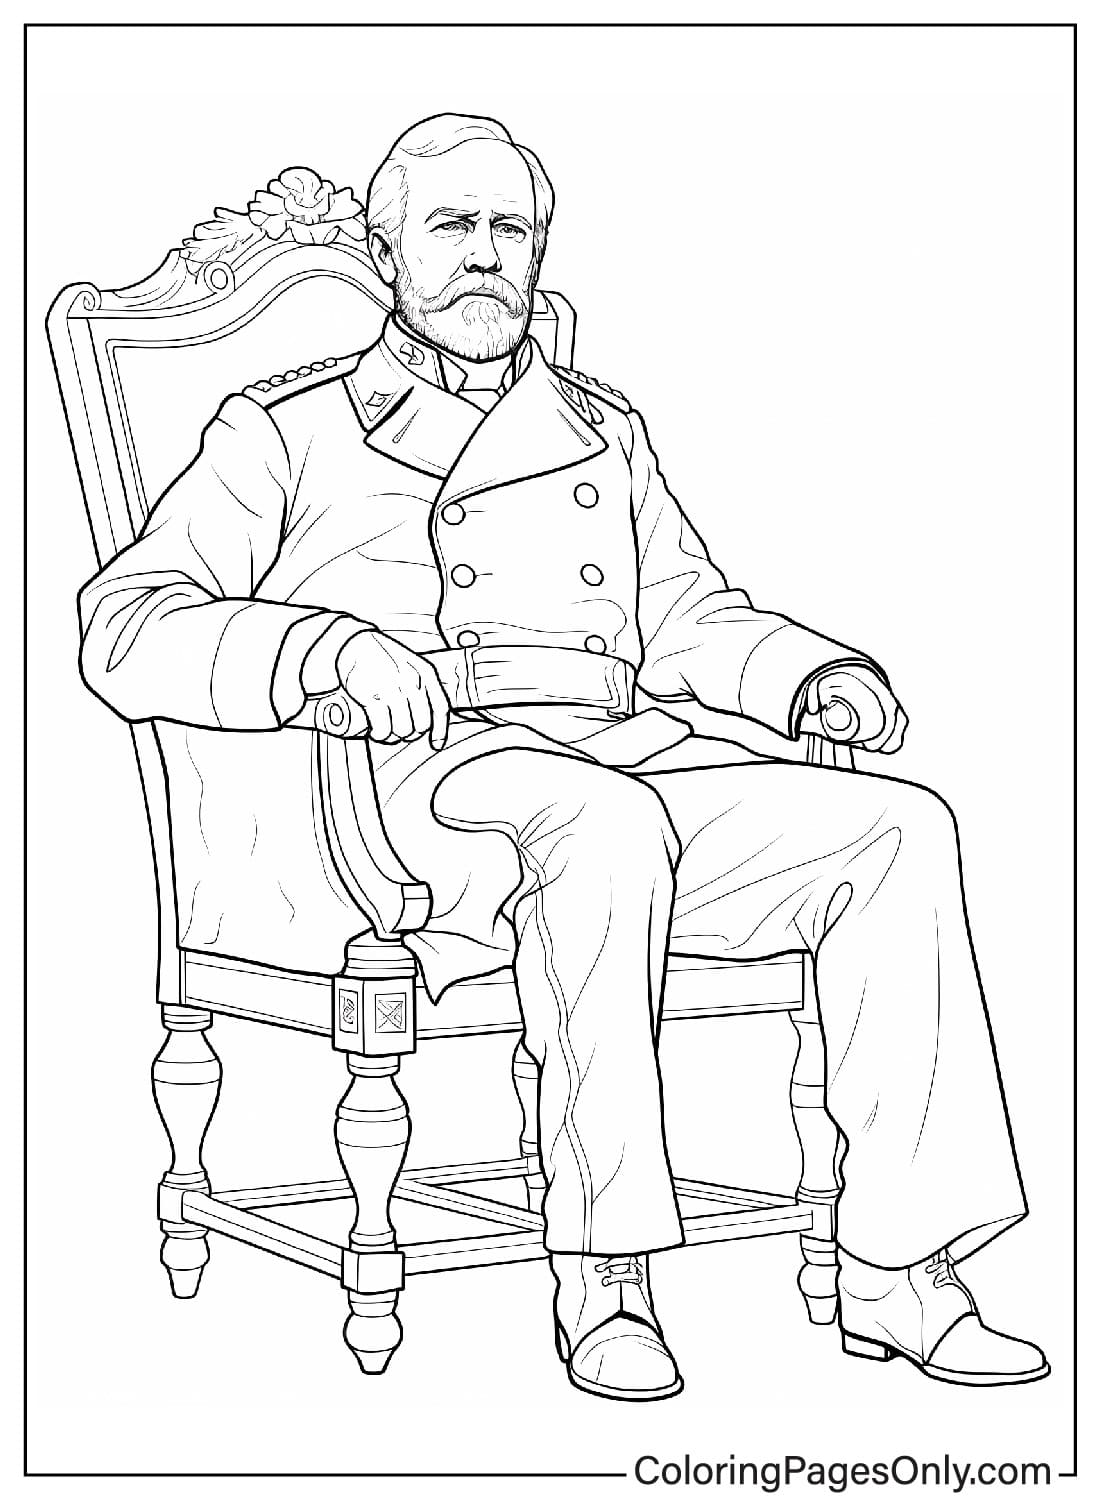 Drawing Robert E. Lee Coloring Page from Robert E. Lee